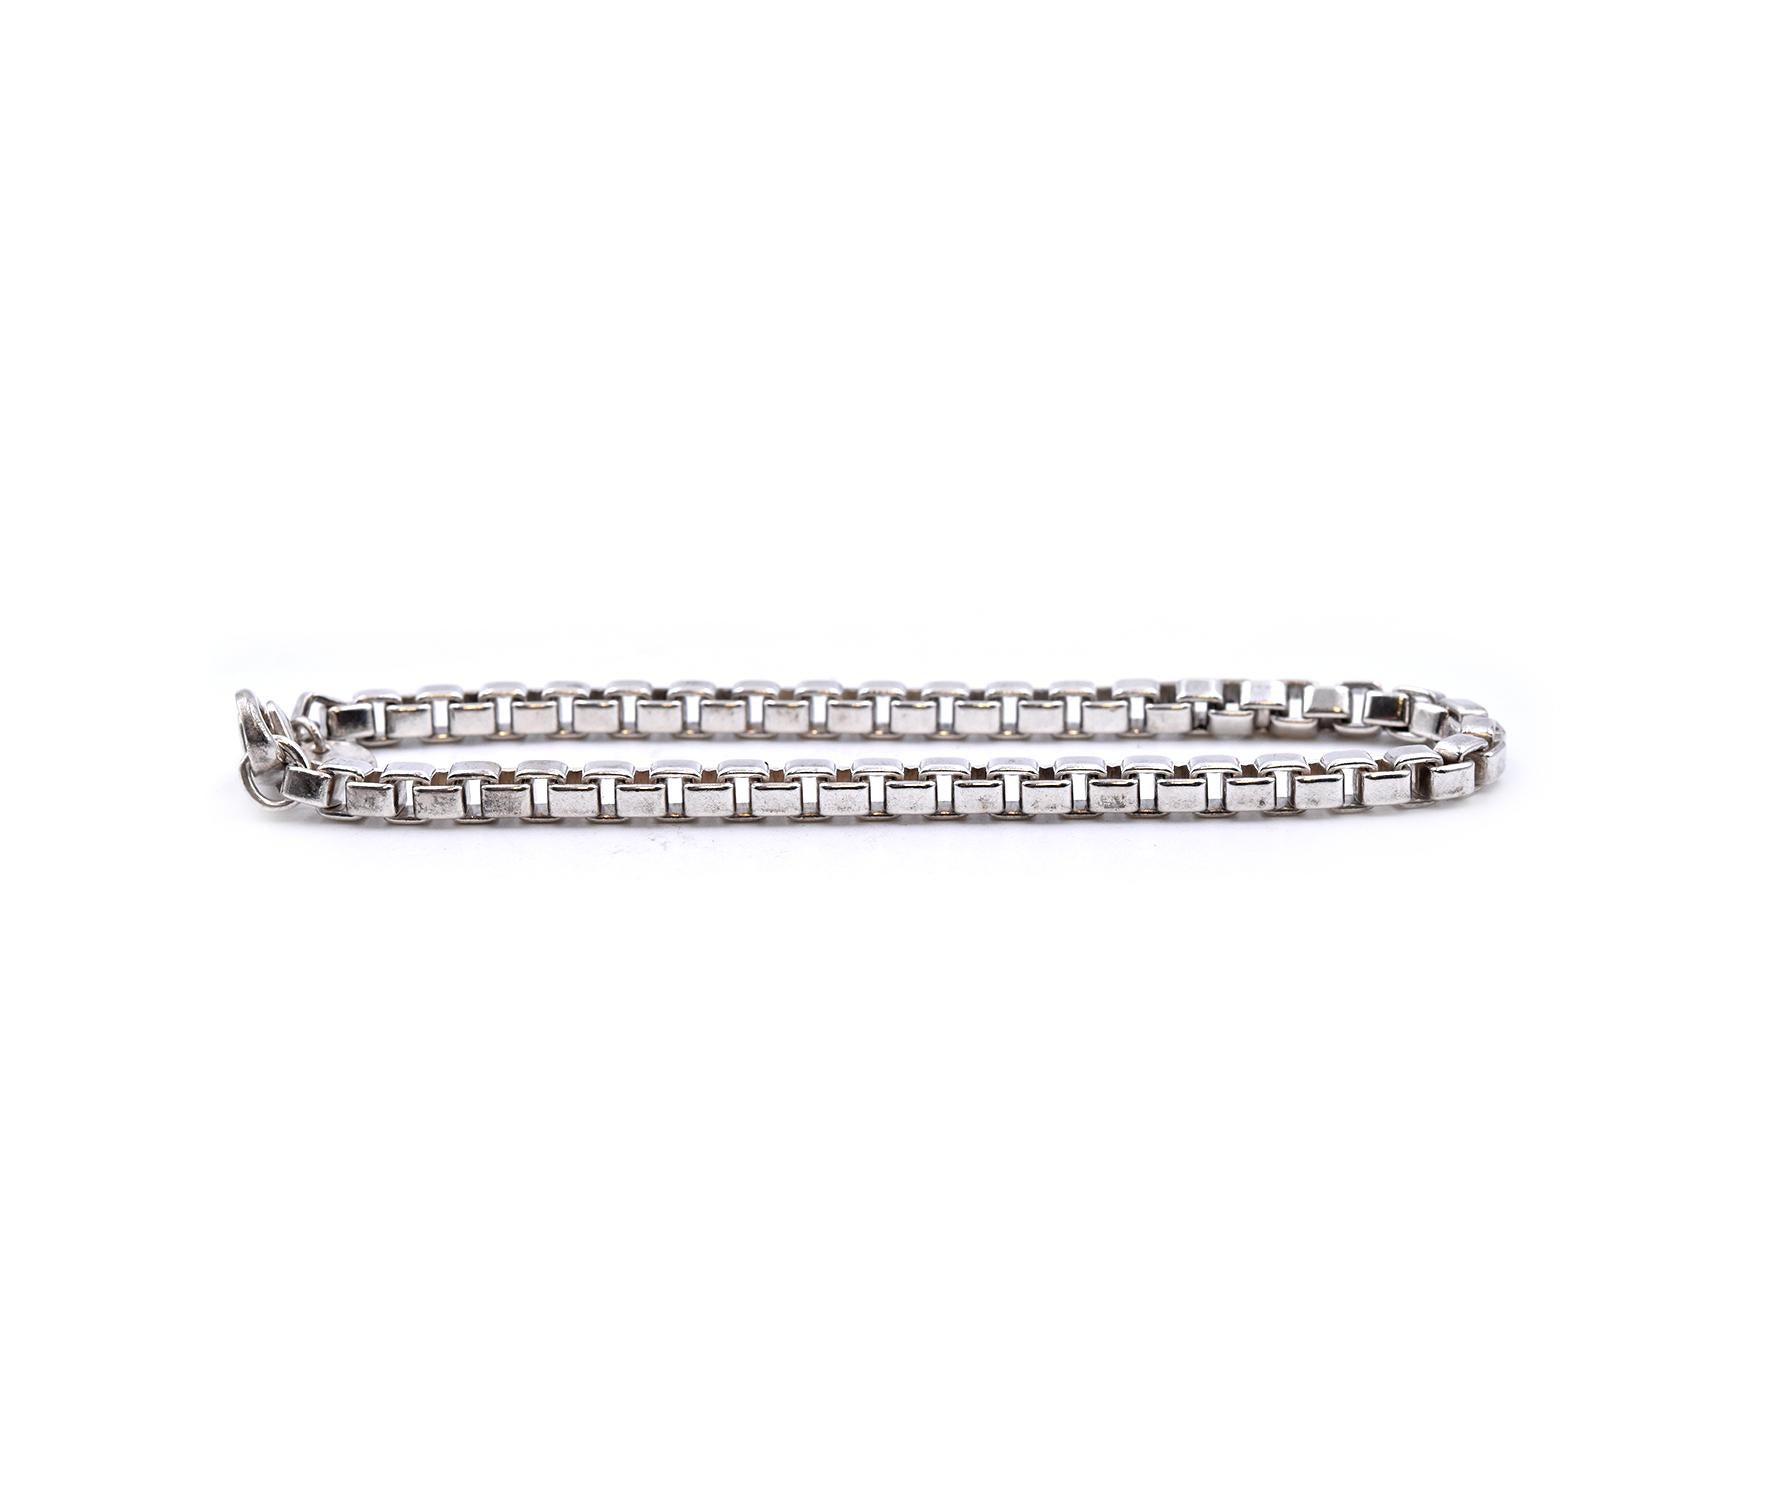 Designer: Tiffany & Co. 
Material: Sterling Silver 
Dimensions: Bracelet measures 7.5-inches 
Weight: 14.93 grams